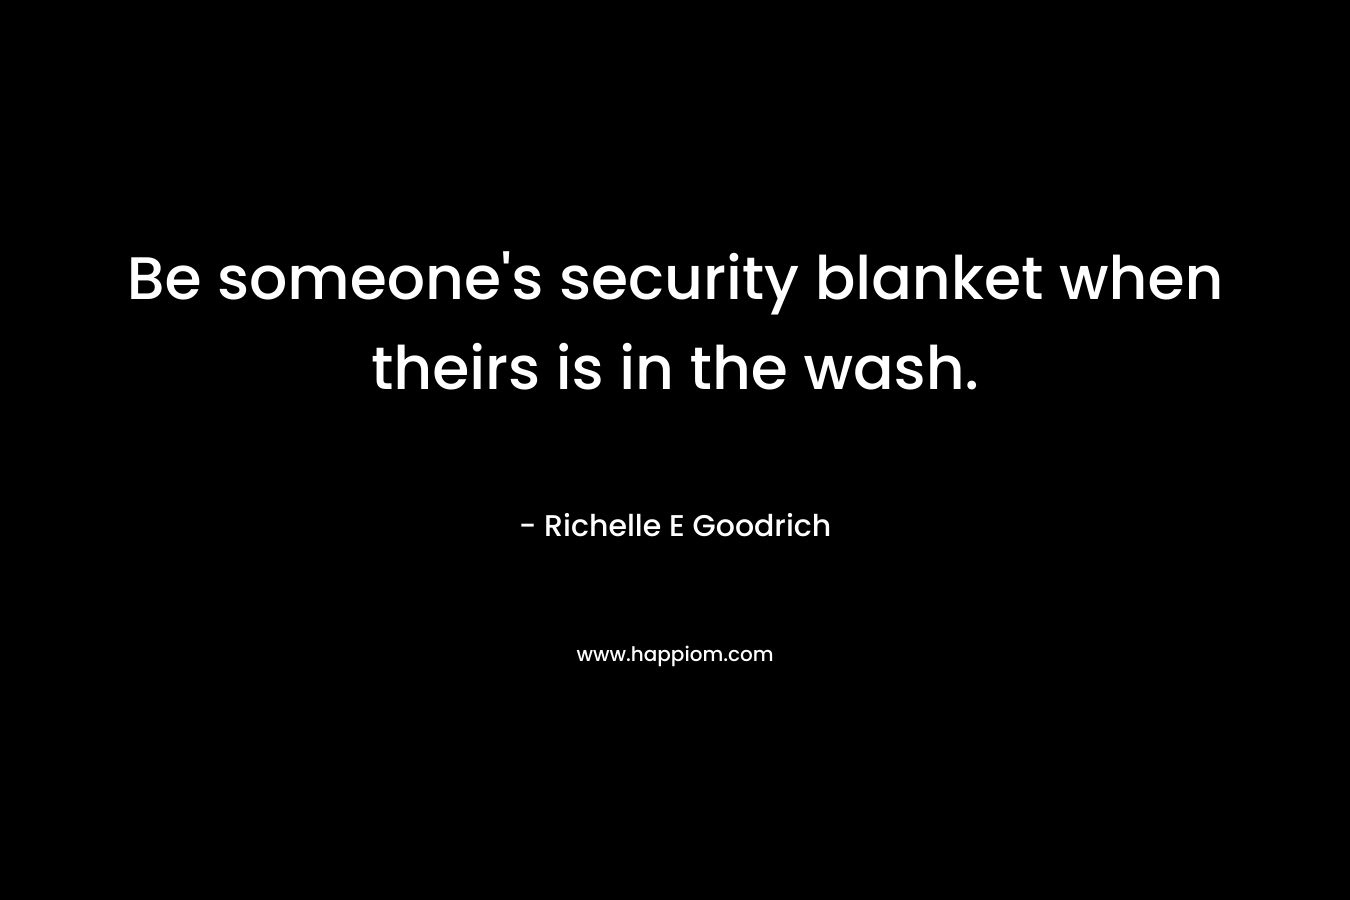 Be someone’s security blanket when theirs is in the wash. – Richelle E Goodrich